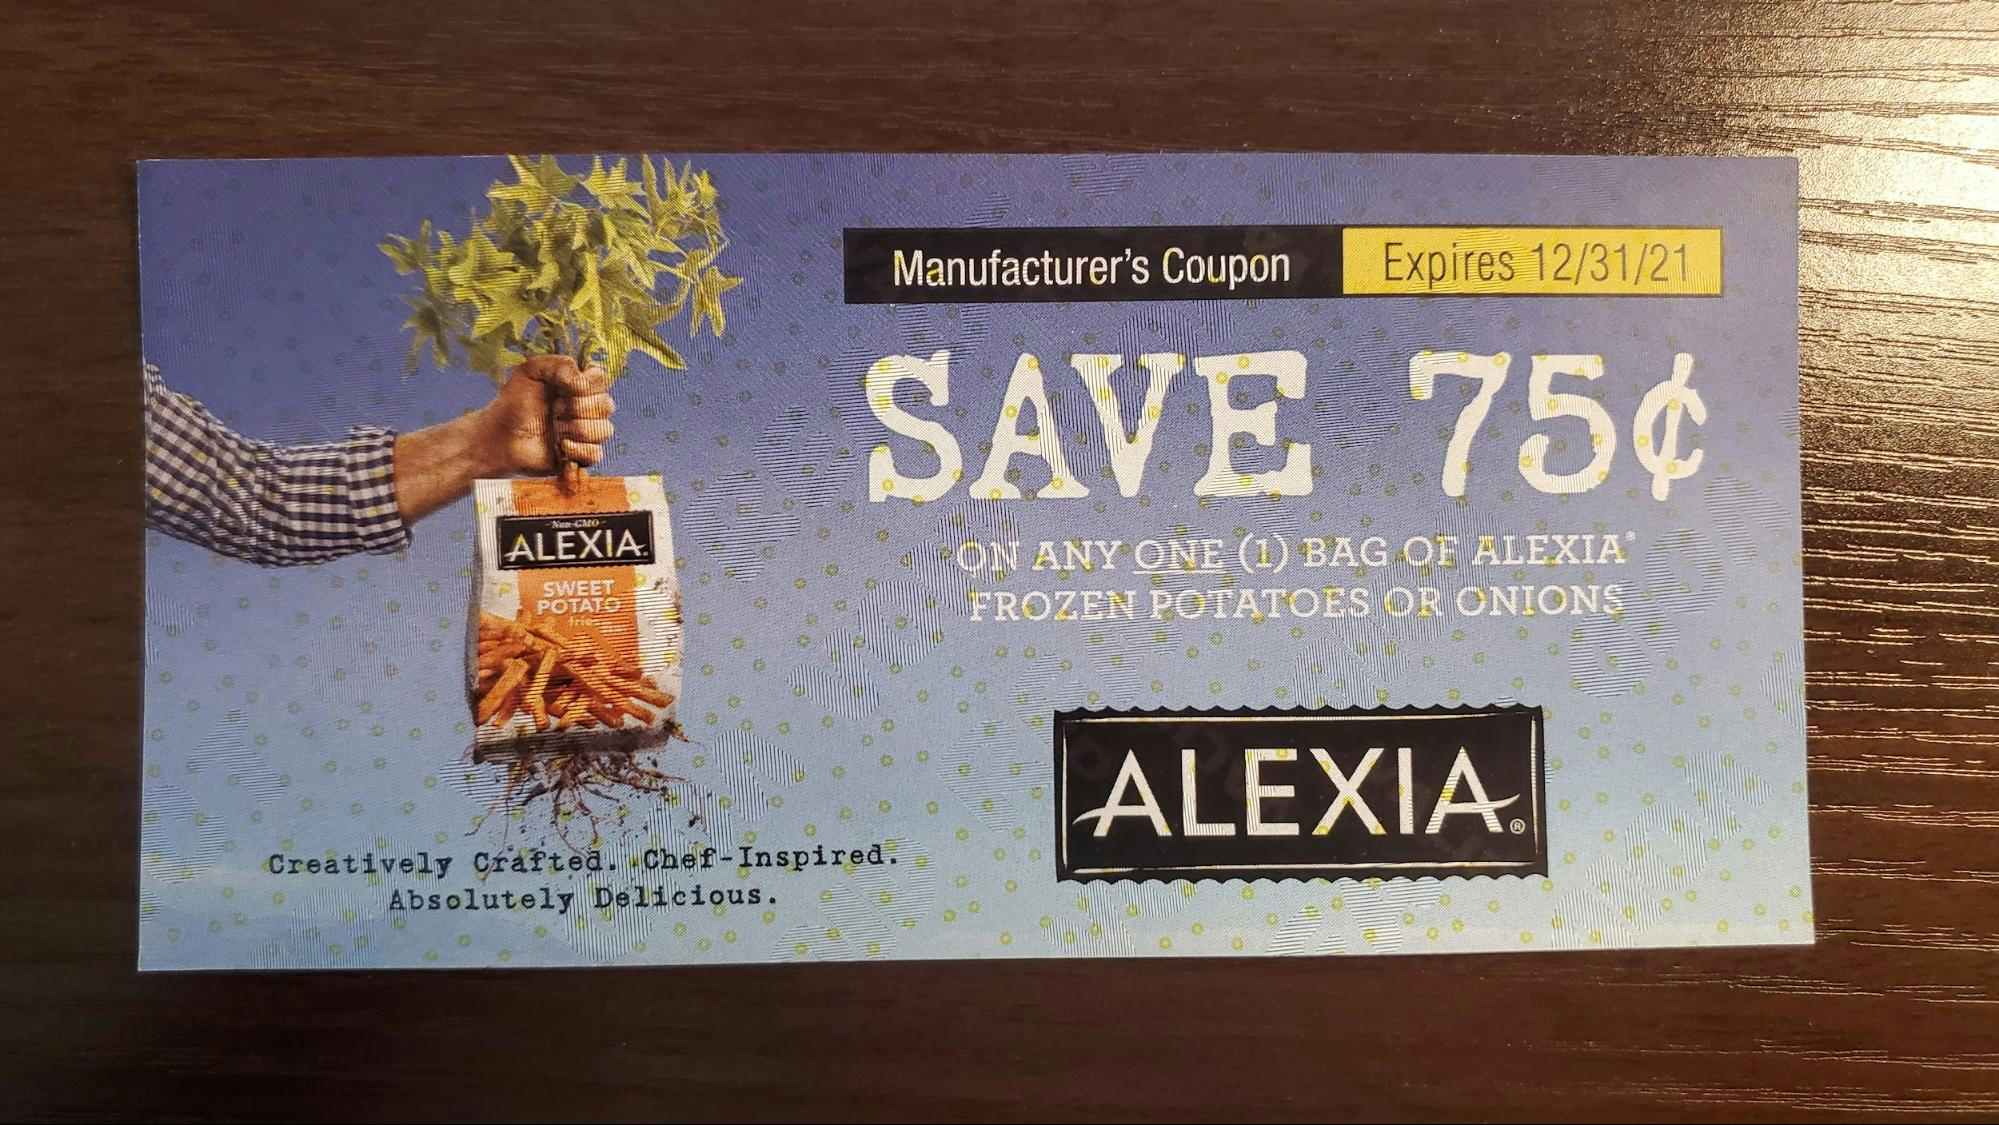 Free Alexia coupons by mail